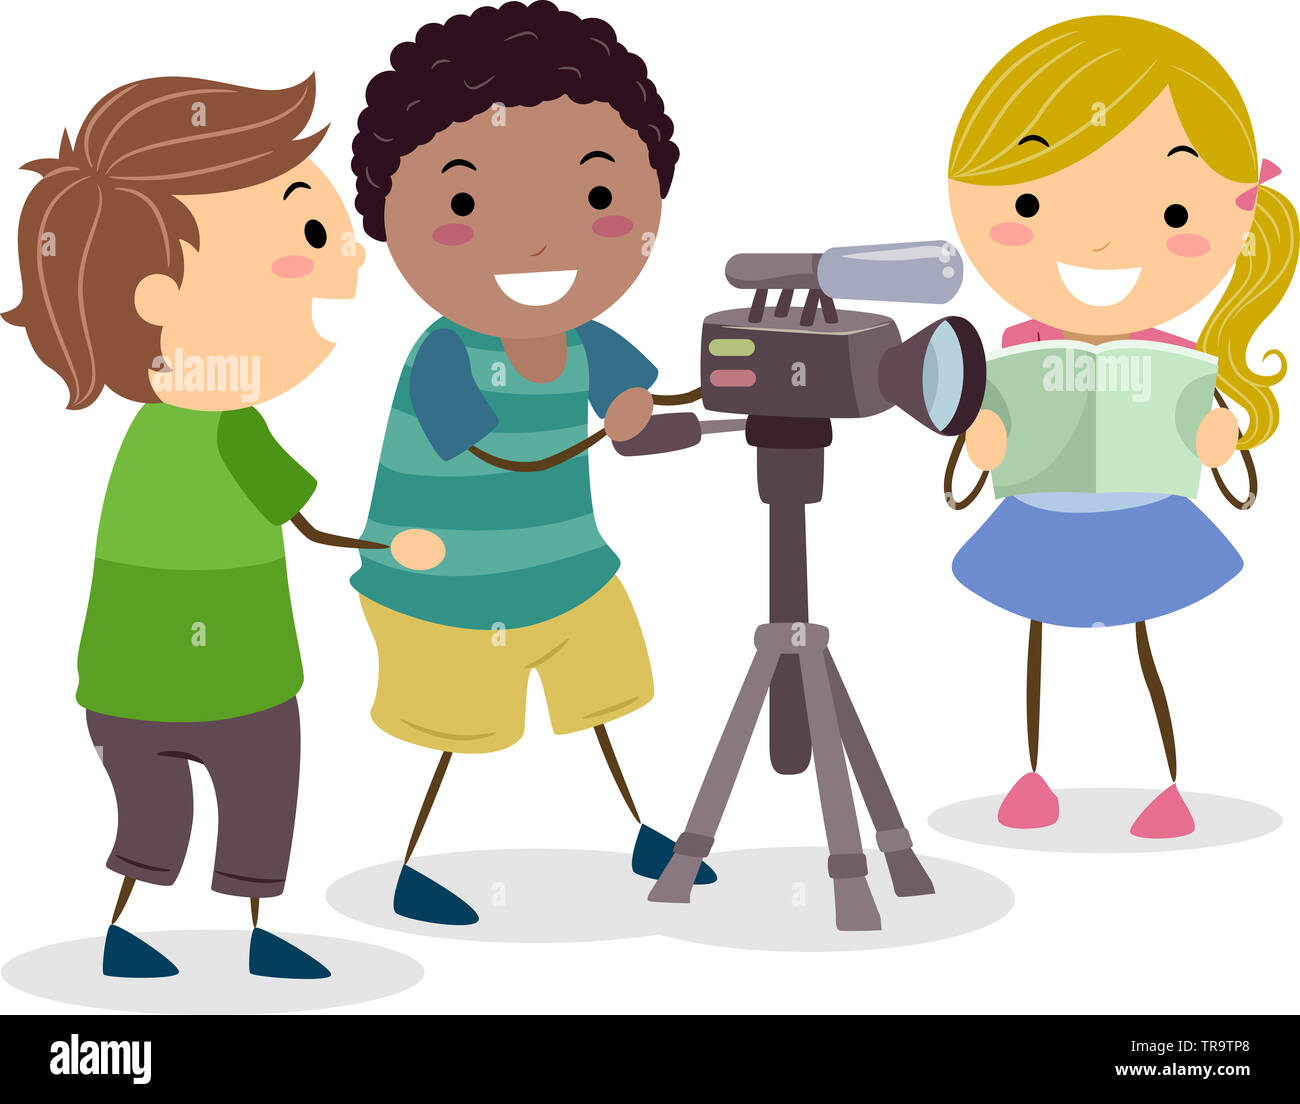 Illustration Of Stickman Kids Filming And Using A Video Camera With Microphone Stock Photo Alamy